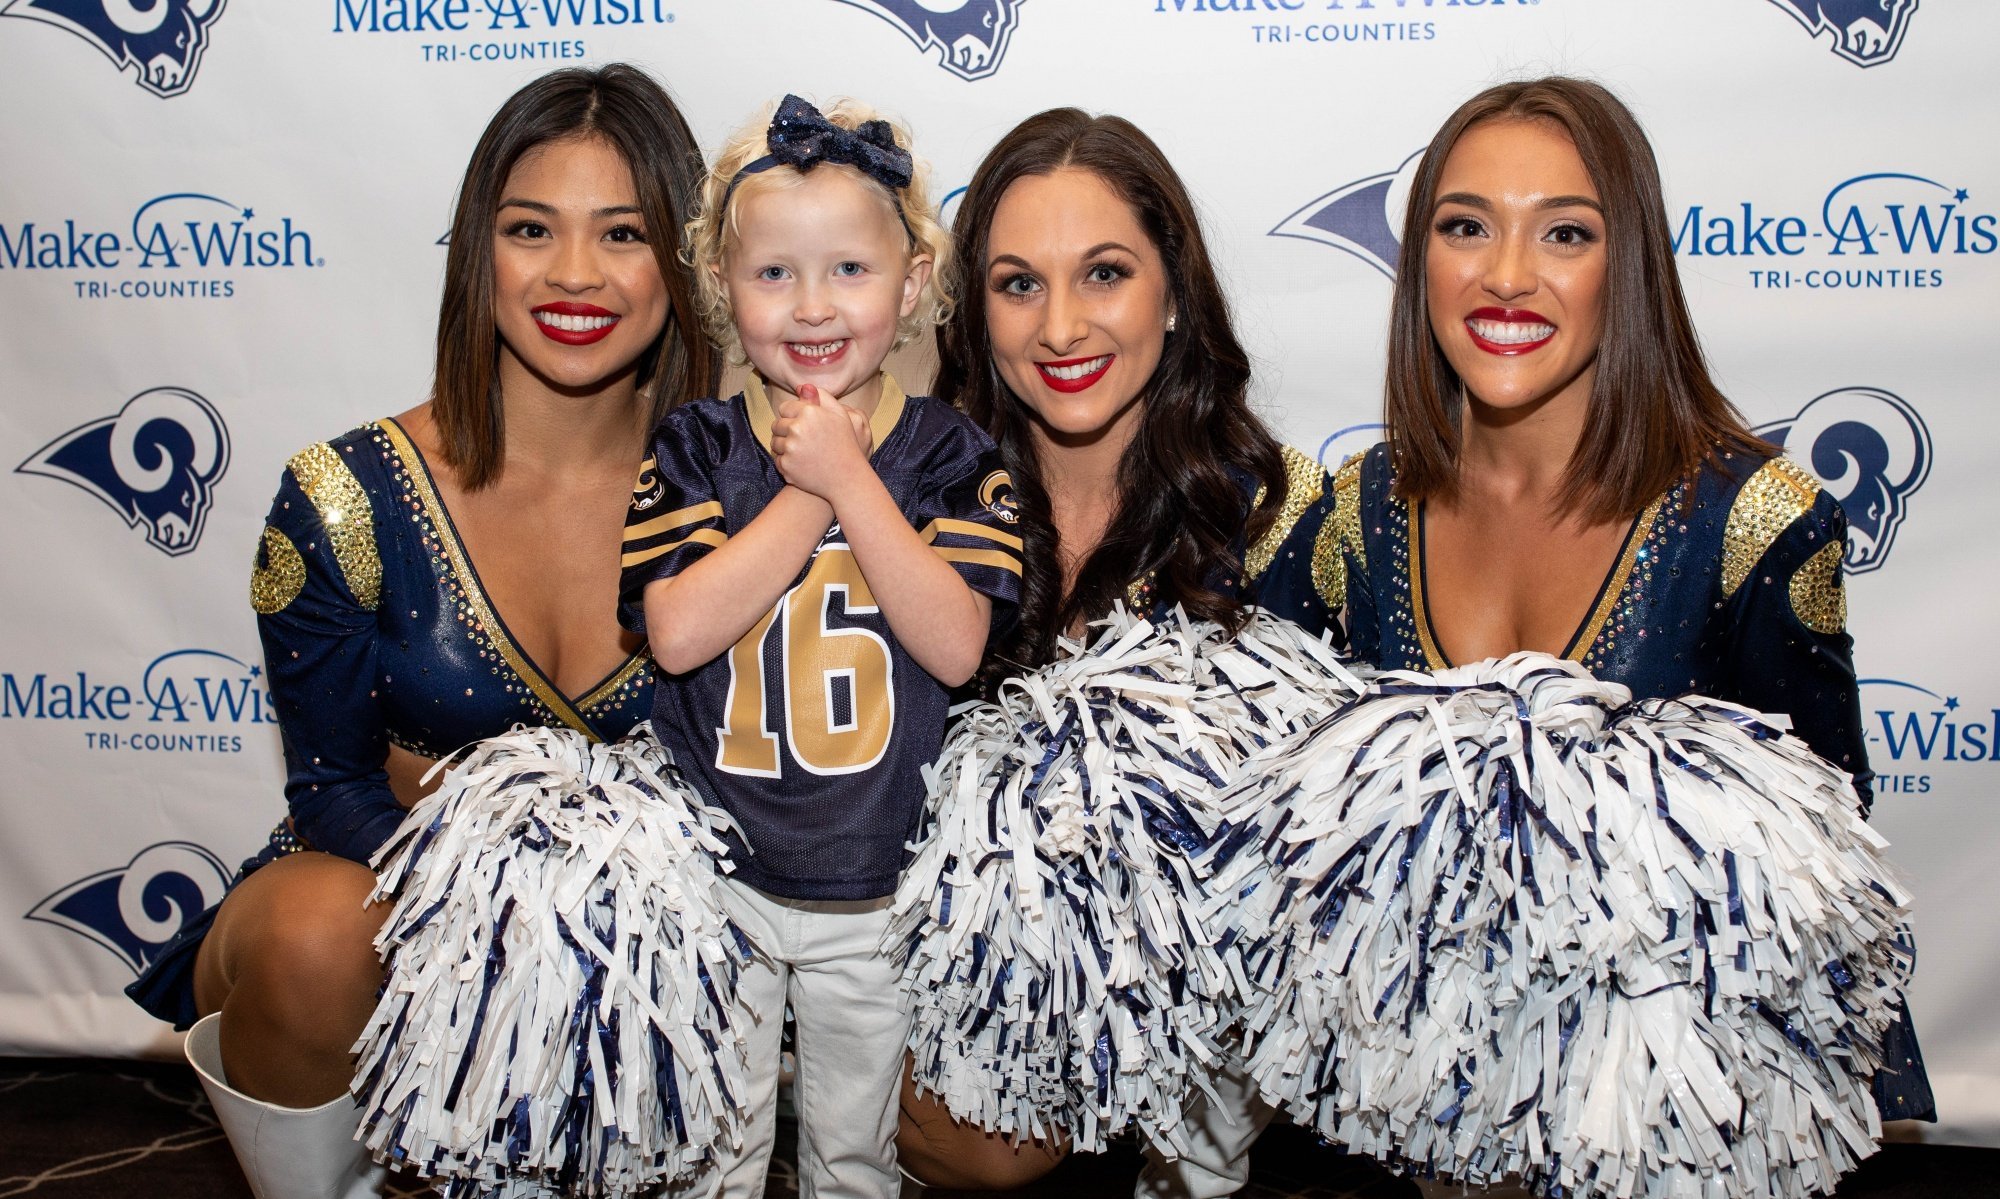 LA Rams Night for Wishes! Make-A-Wish Tri-Counties